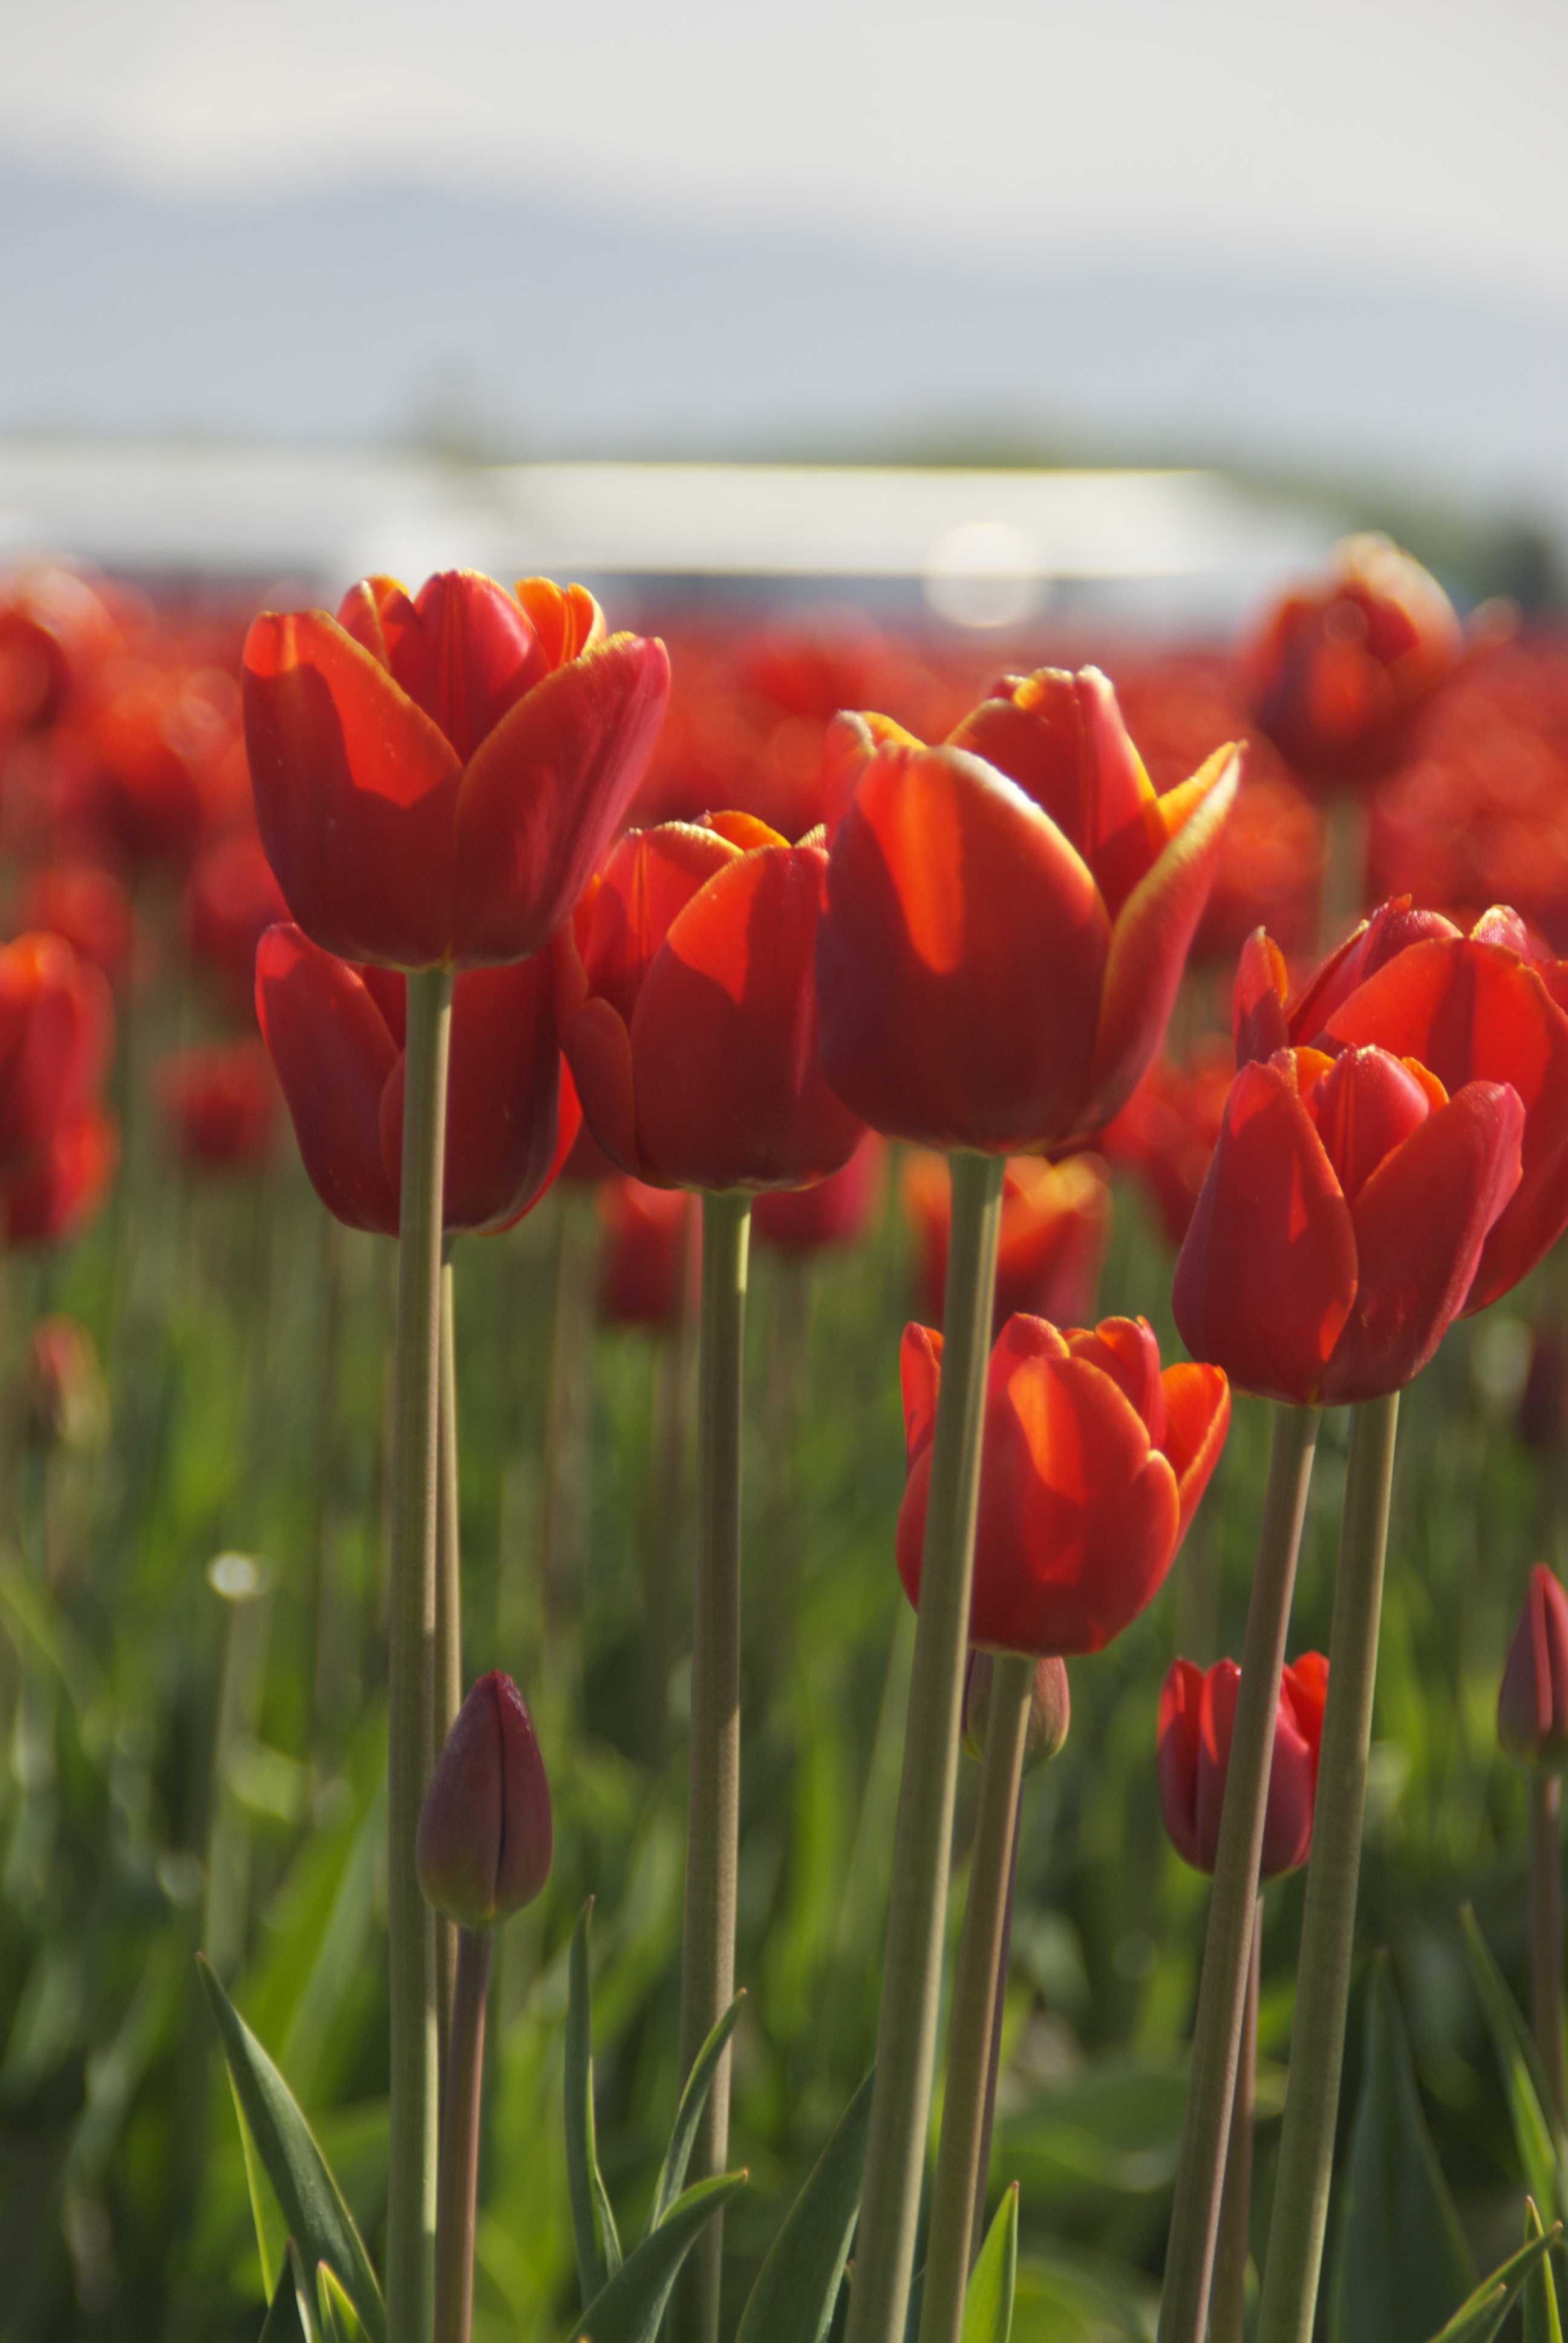 A year in the fields: Skagit Valley the heart of U.S. tulips ...